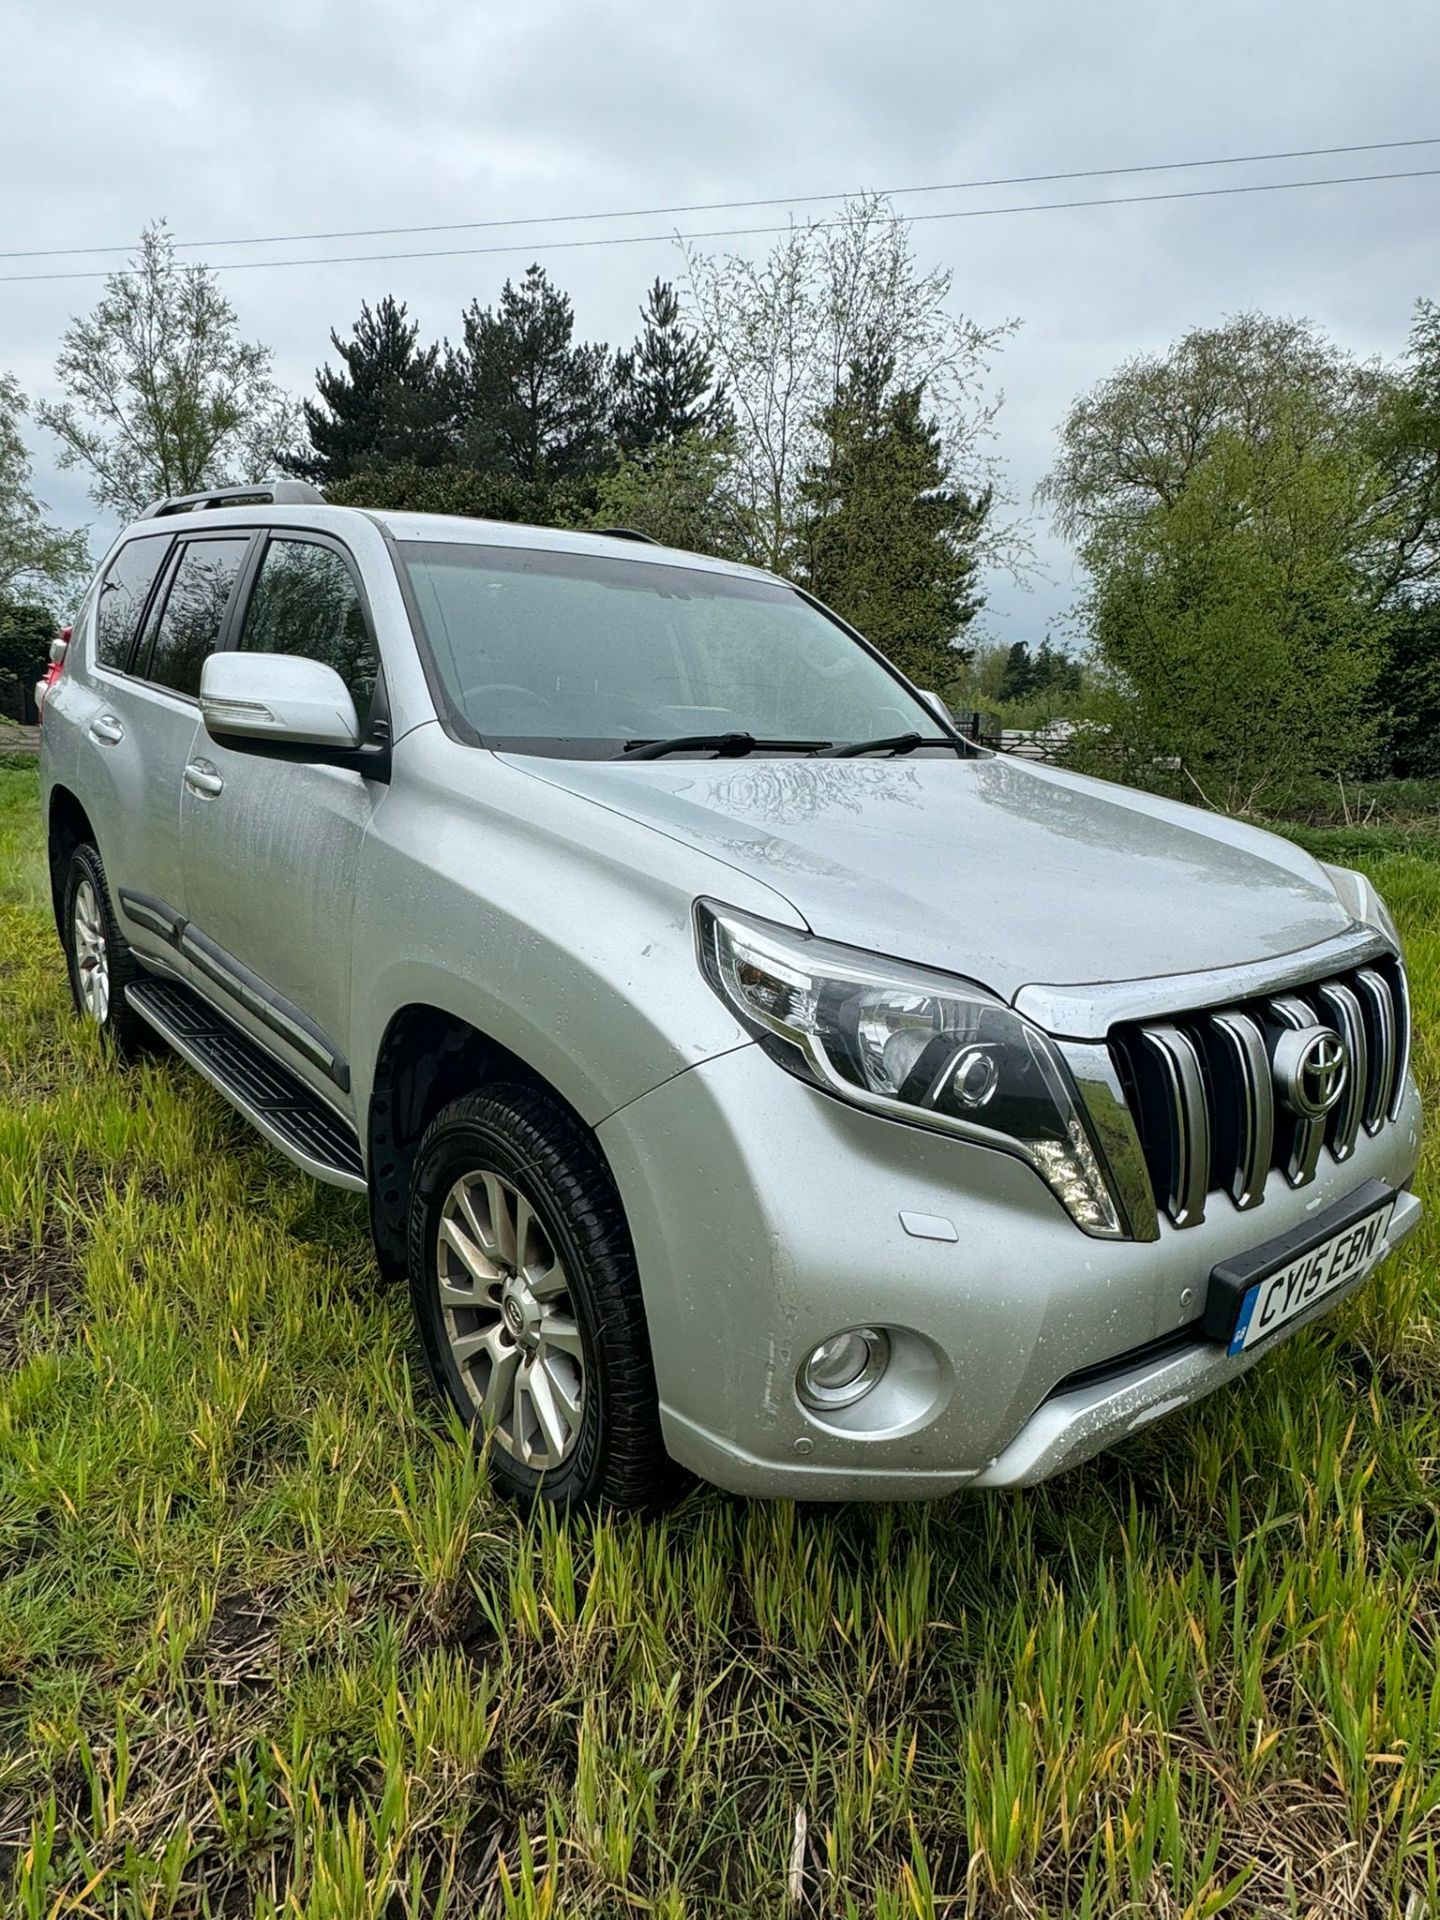 >>>SPECIAL CLEARANCE<<< TOYOTA LANDCRUSER 2015 12 MONTHS MOT - Image 6 of 13